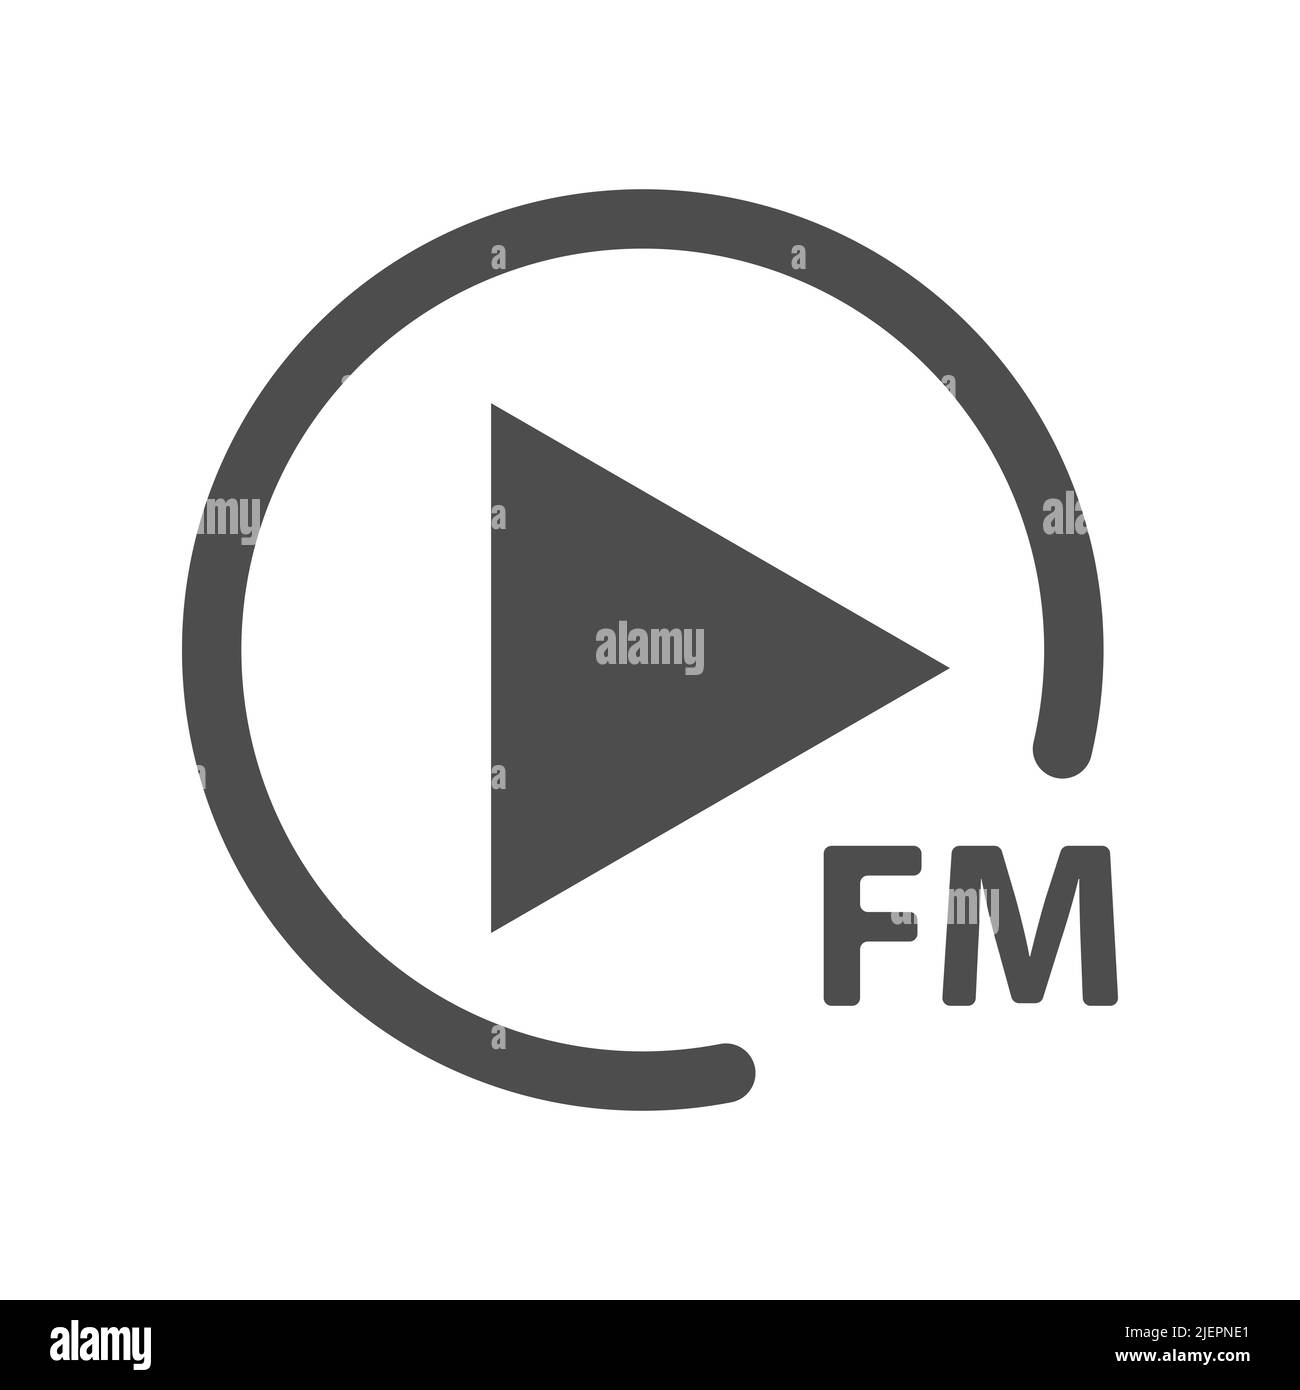 icon of the FM radio player. Illustration for website, application and creative design. Flat style Stock Vector